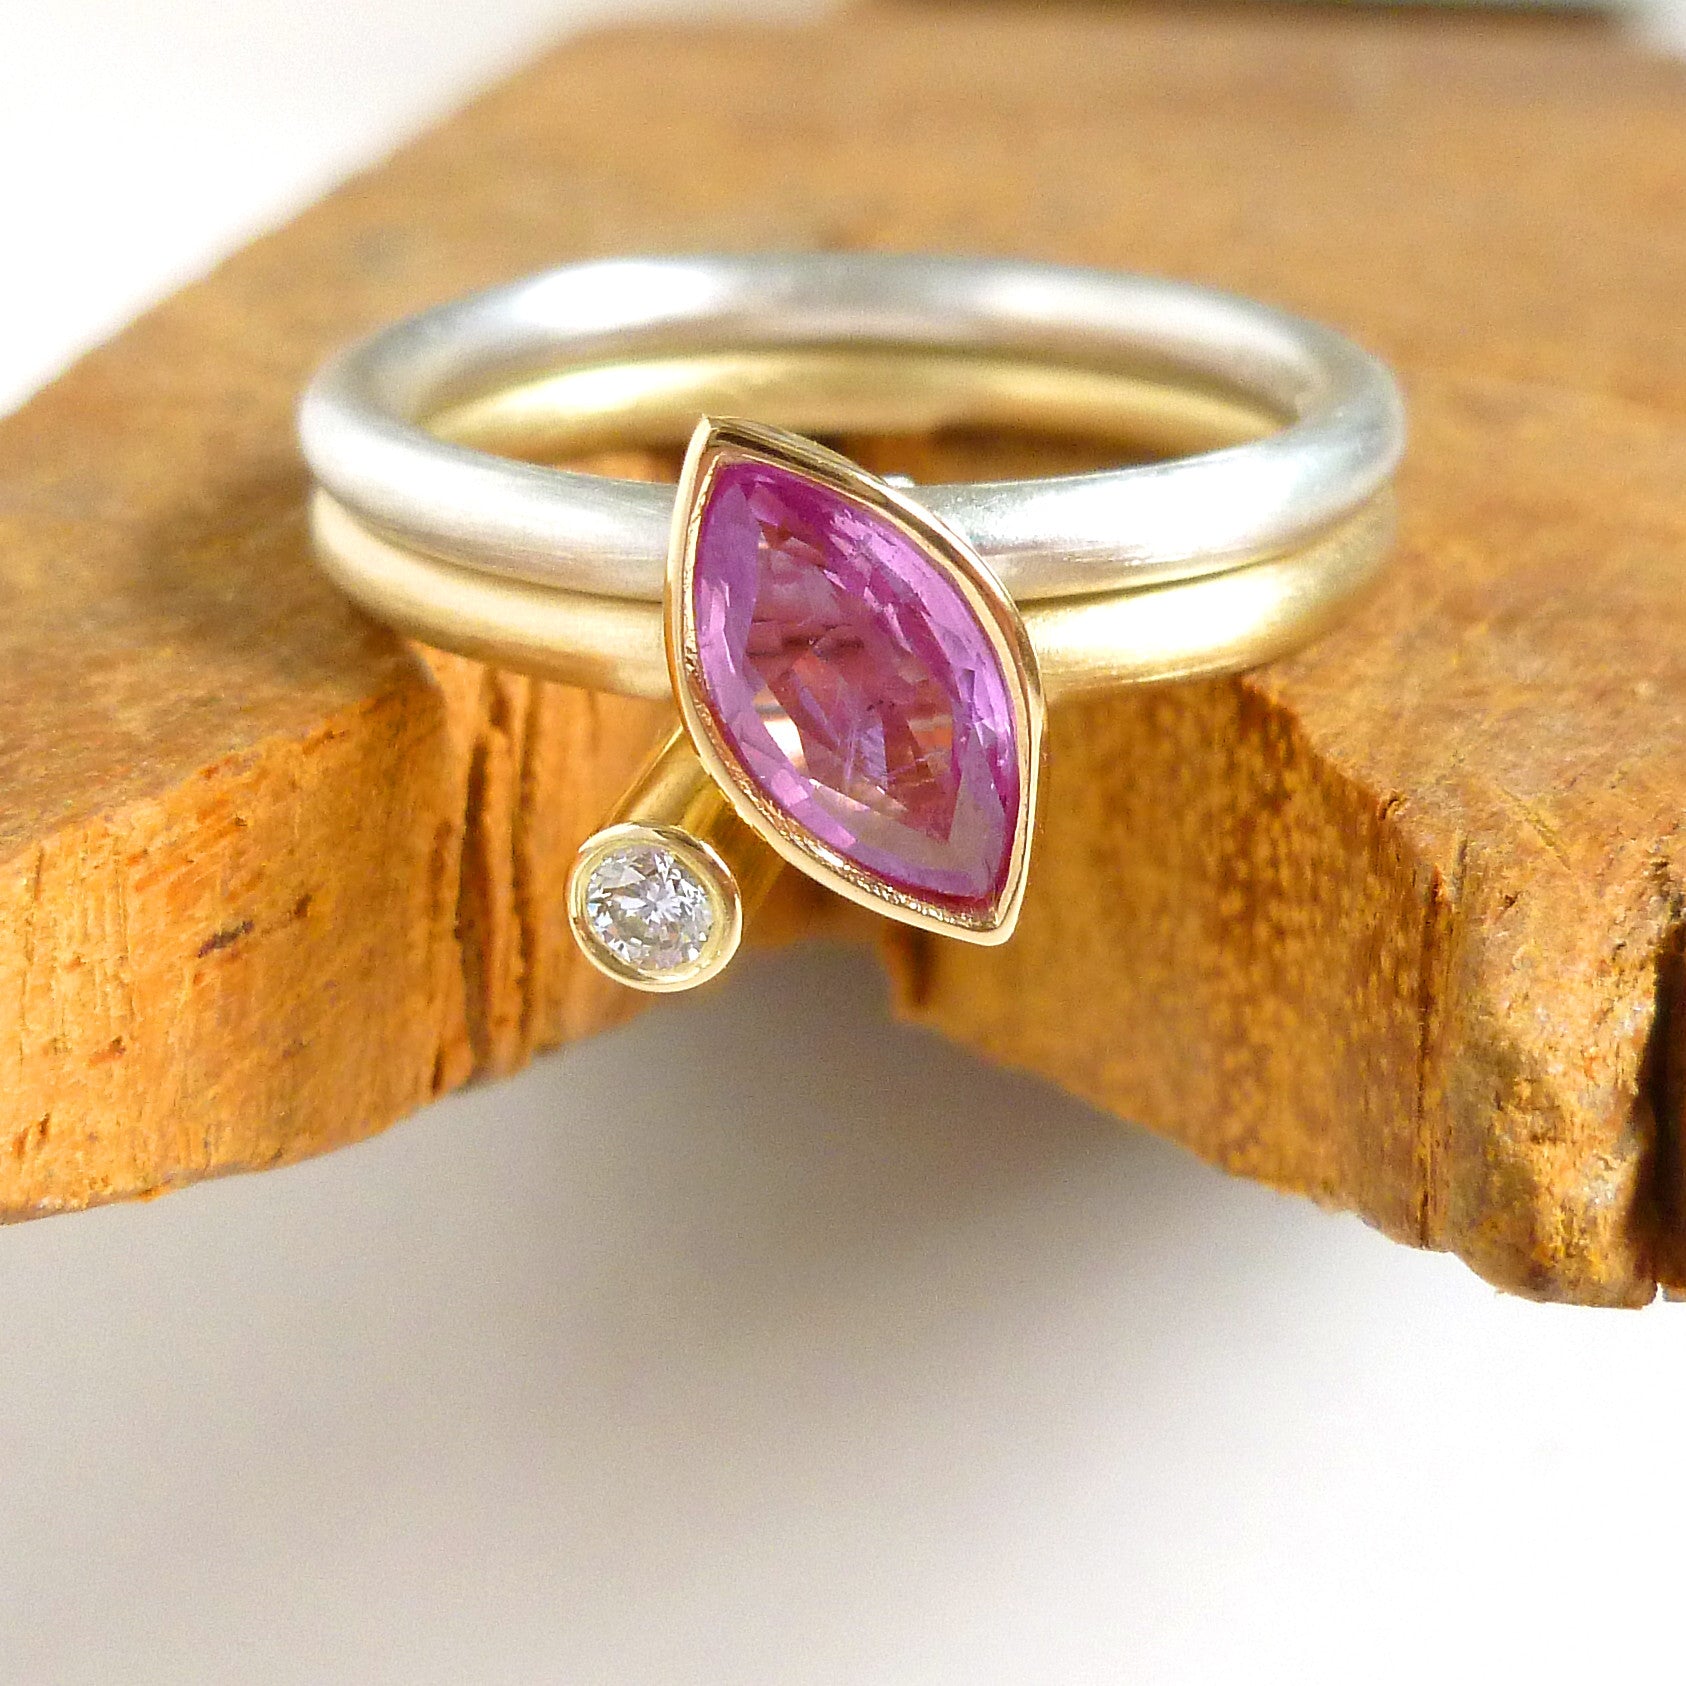 Modern gold and silver two band ring with marquise pink sapphire